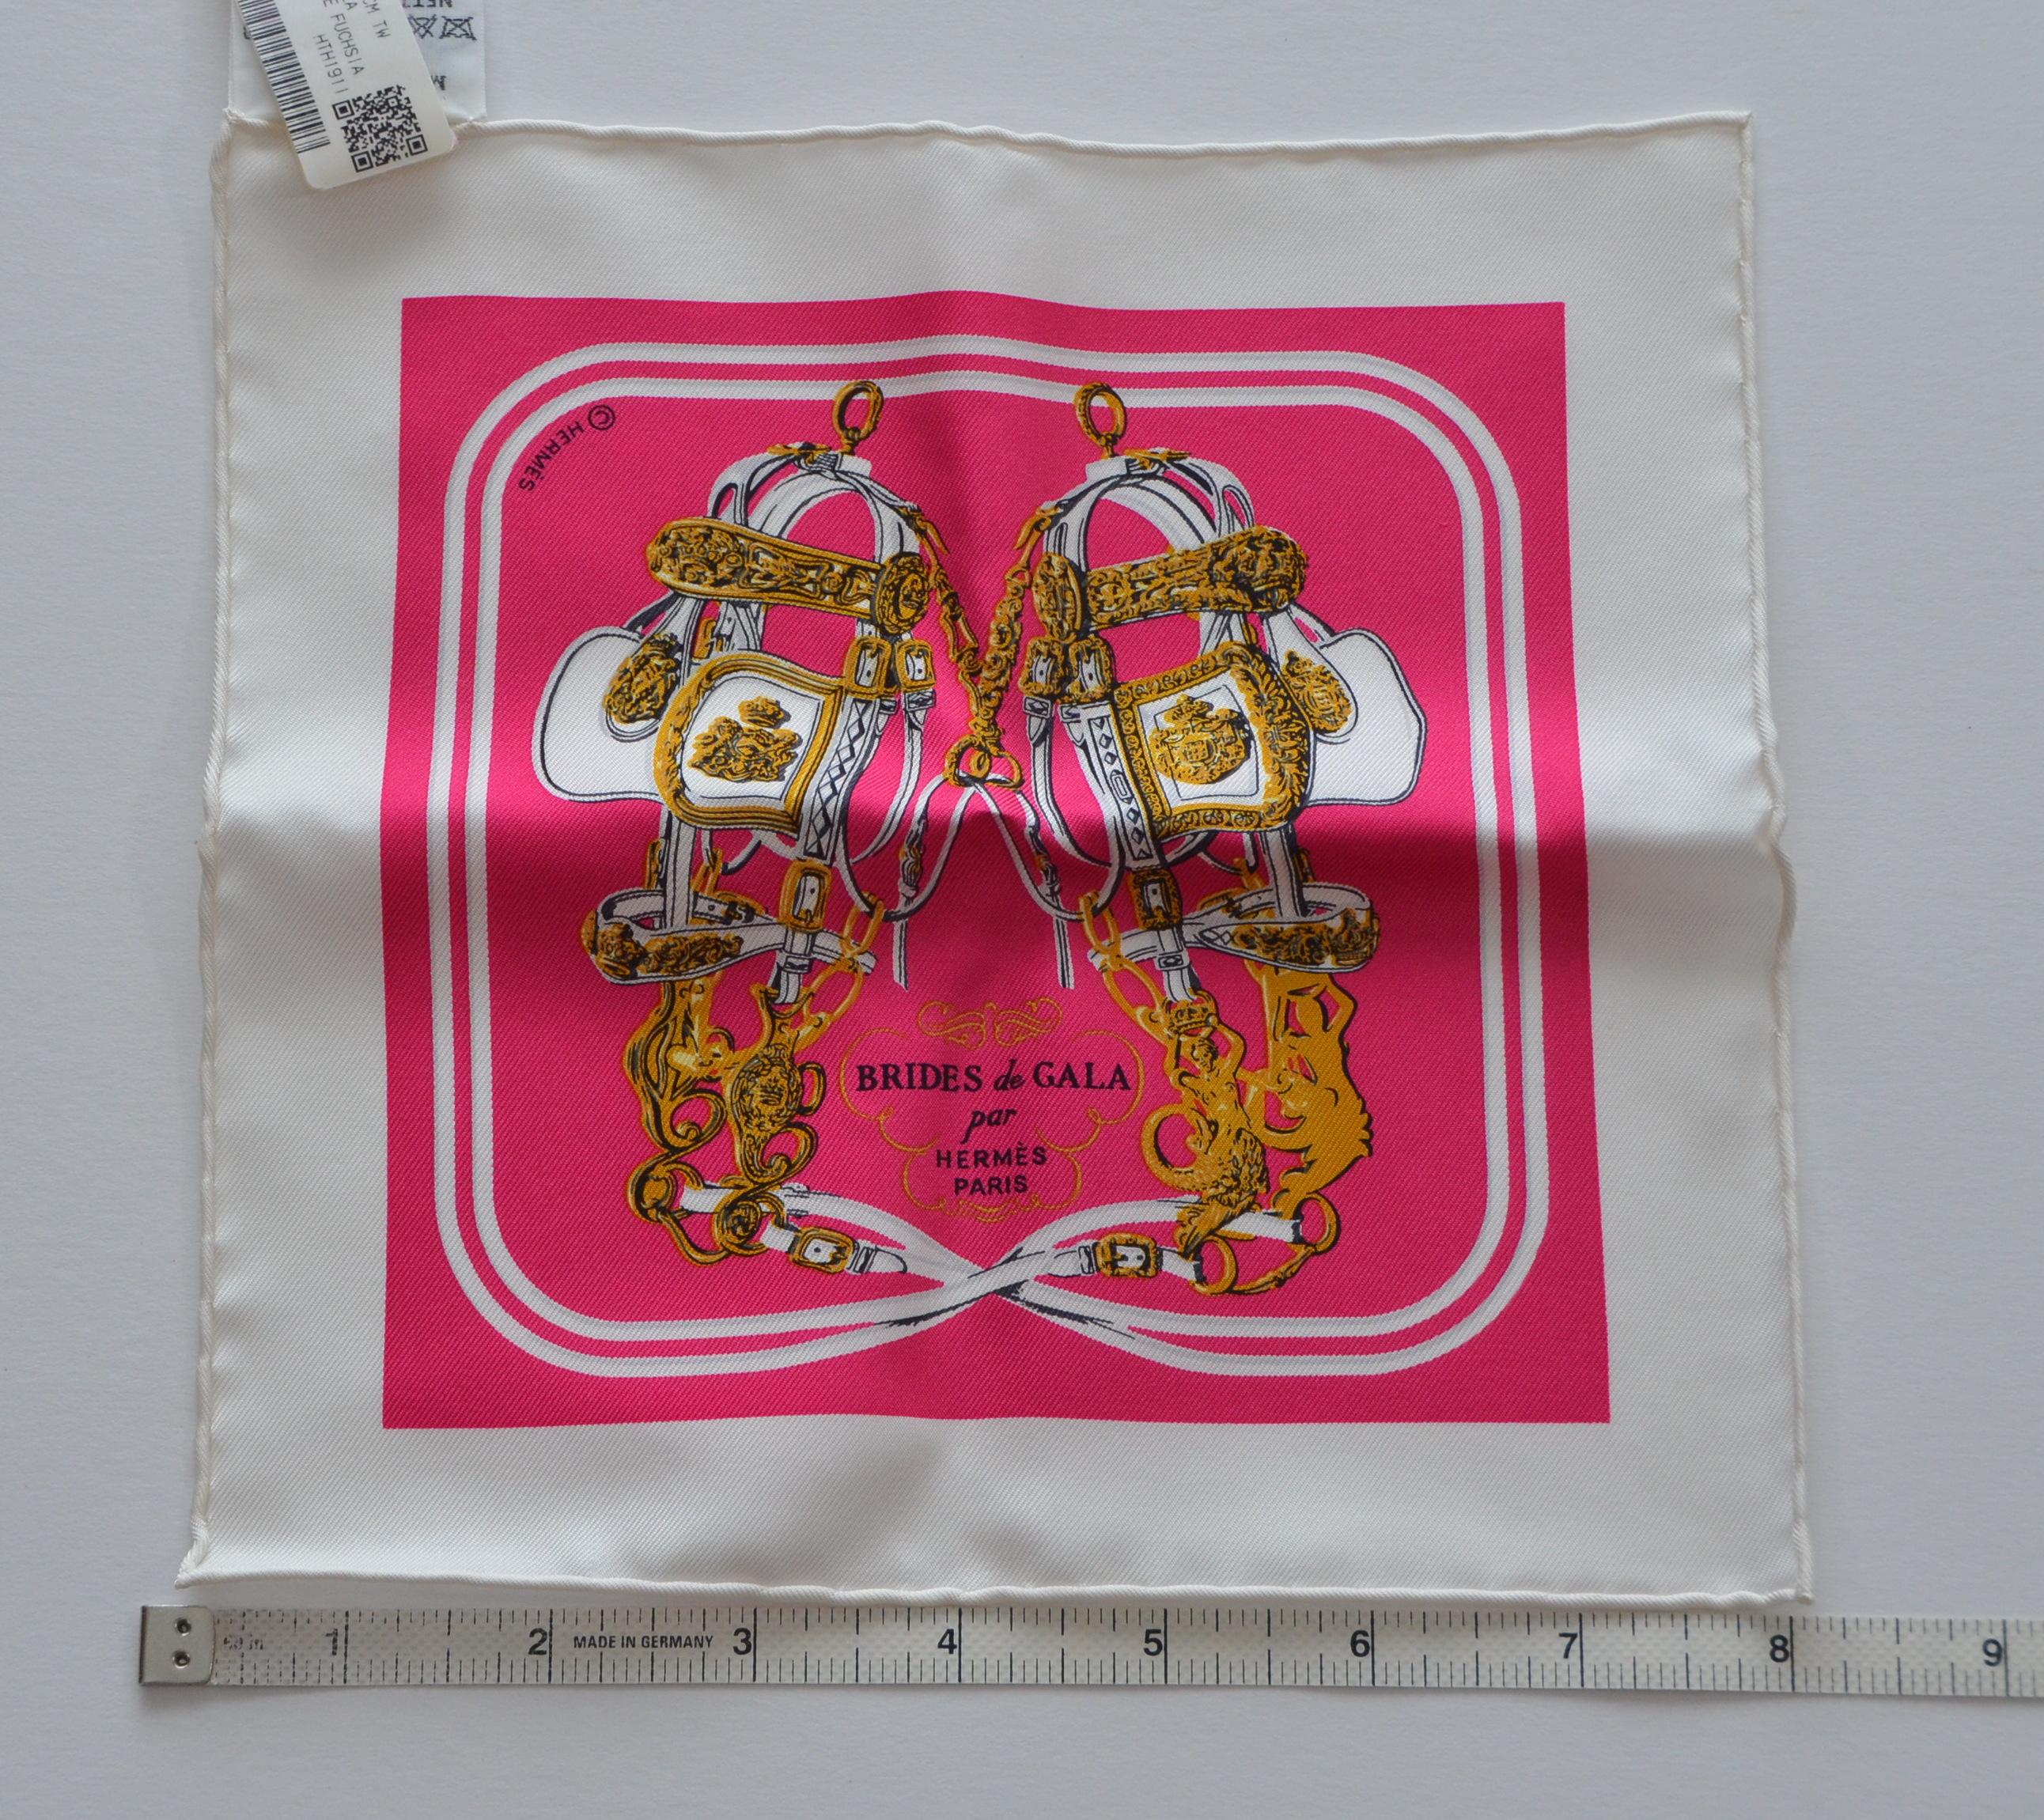 Hermes Scarf Nano Brides de Gala  
New With  Box
Please see pictures with measurement.
This is a nano small scarf 

FINAL SALE